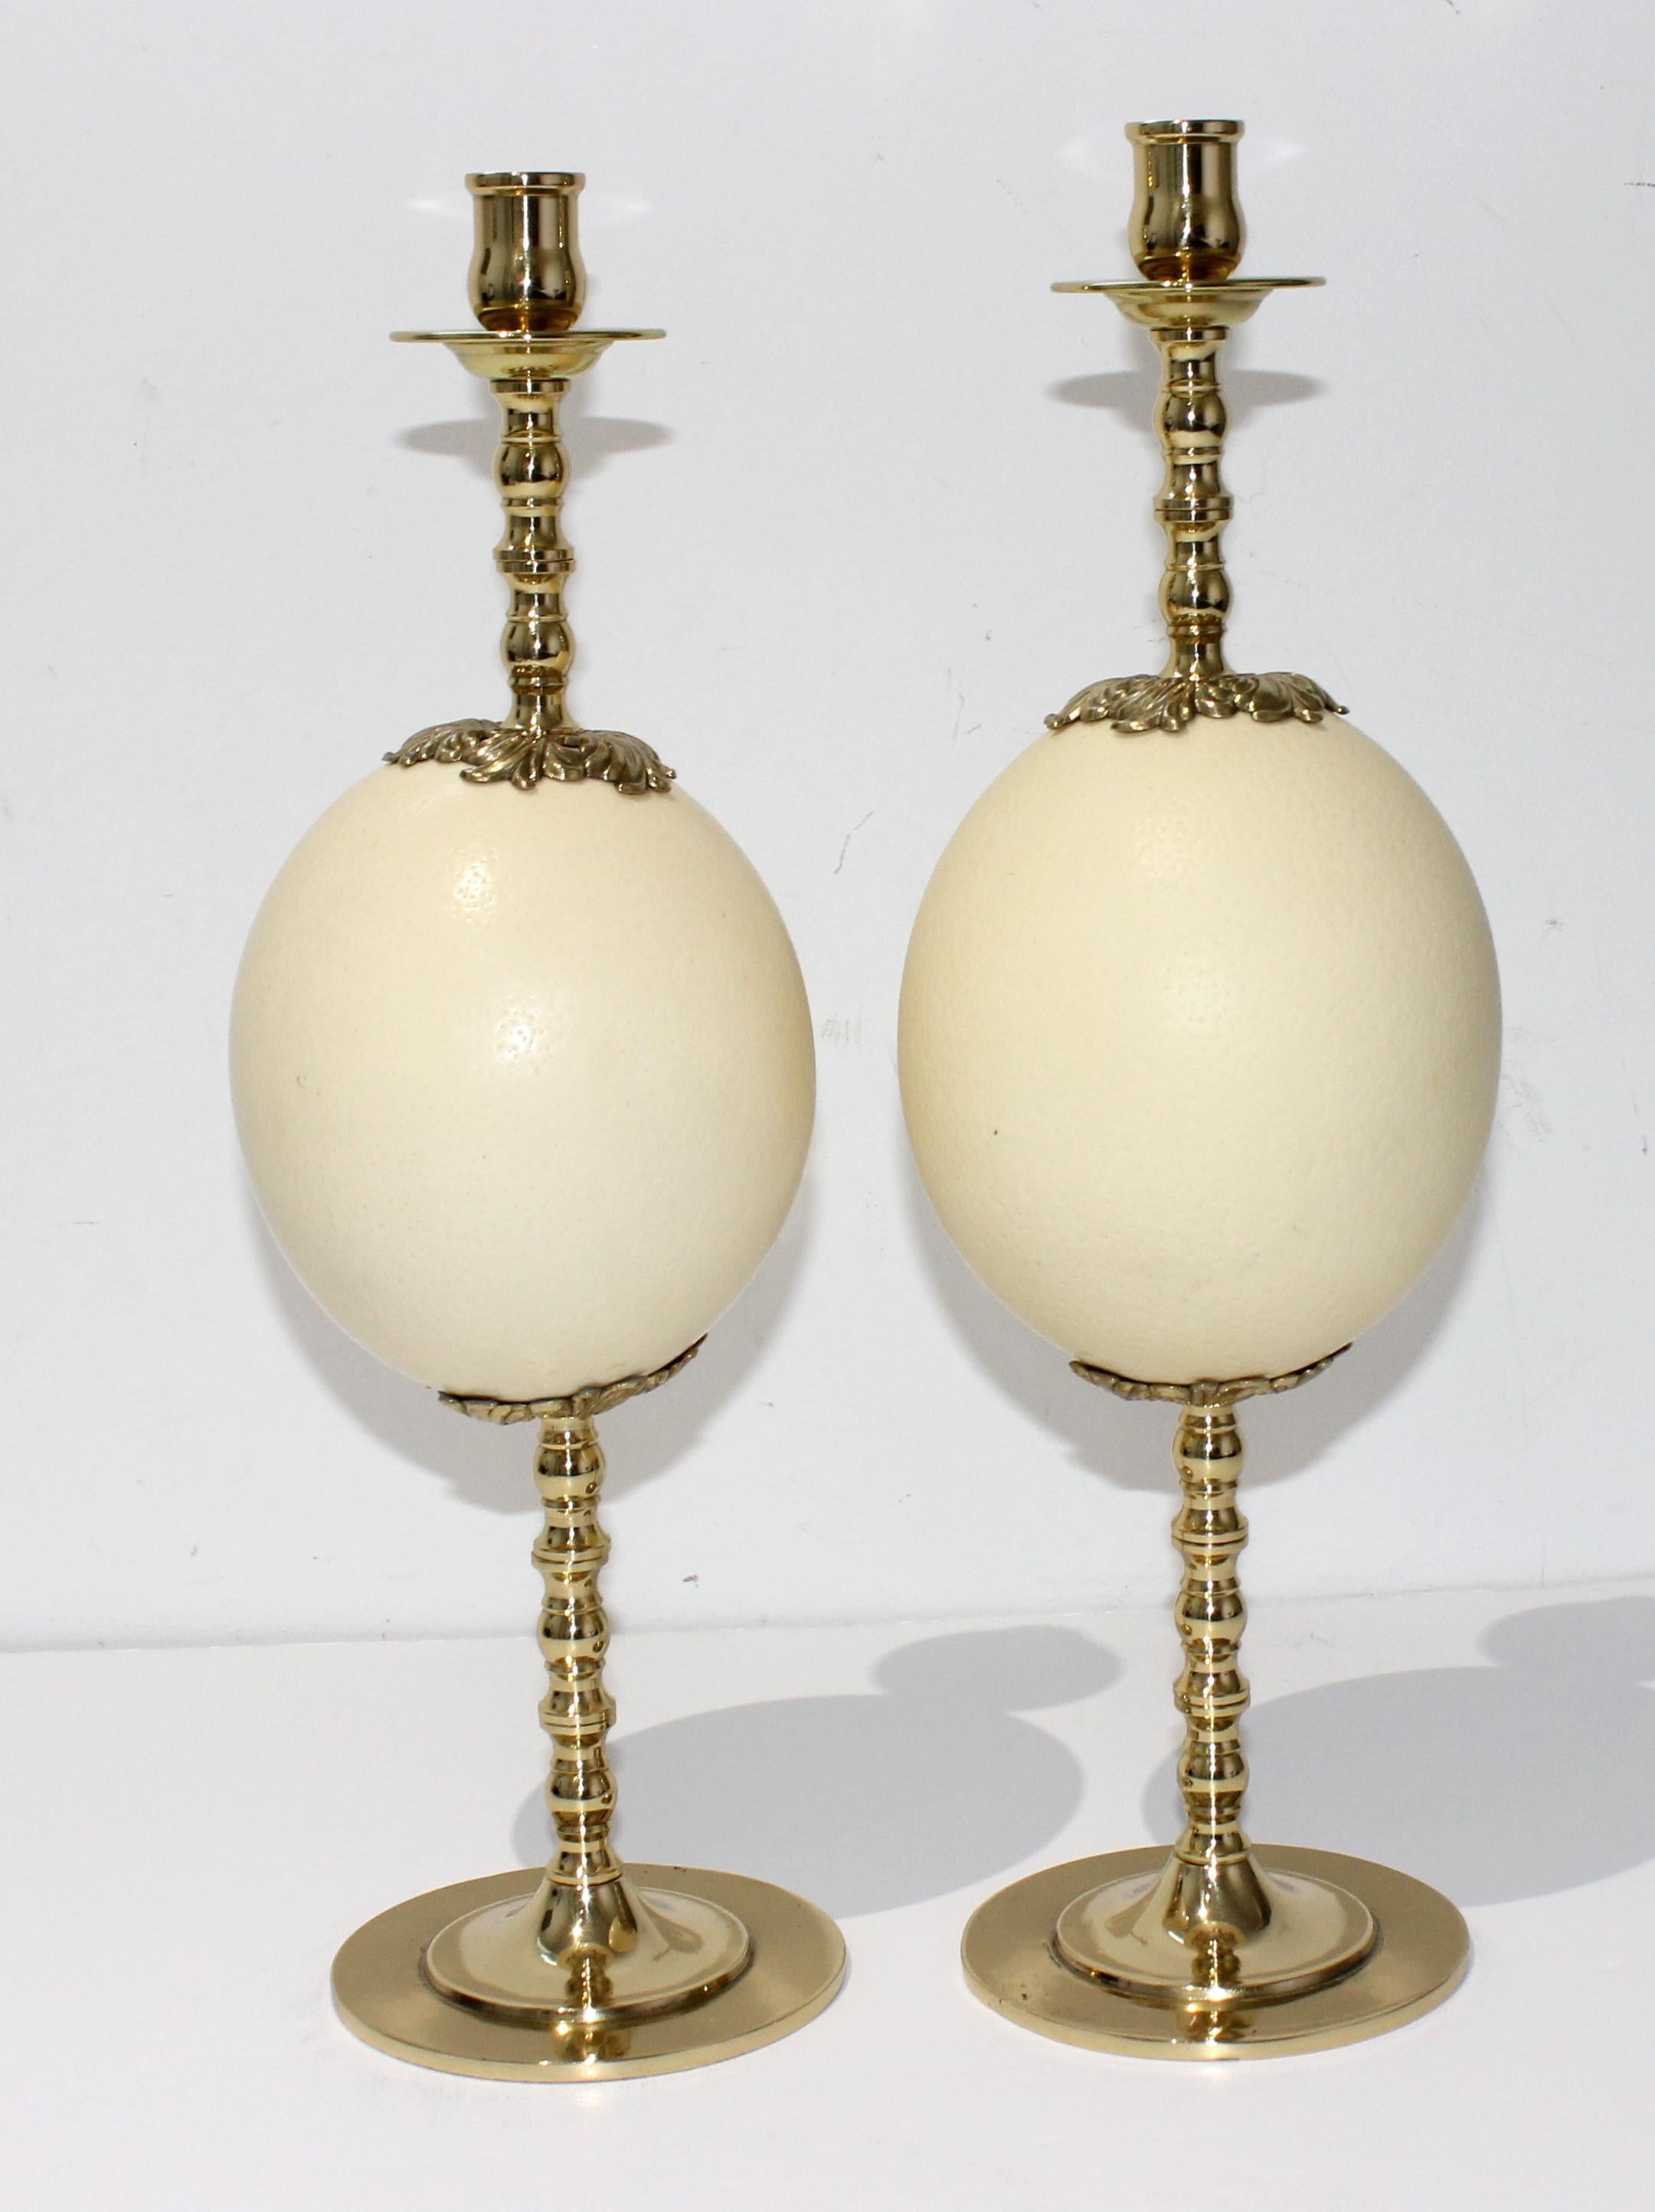 Lacquered Set of Ostrich Egg Candlesticks Style of Tony Duquette For Sale